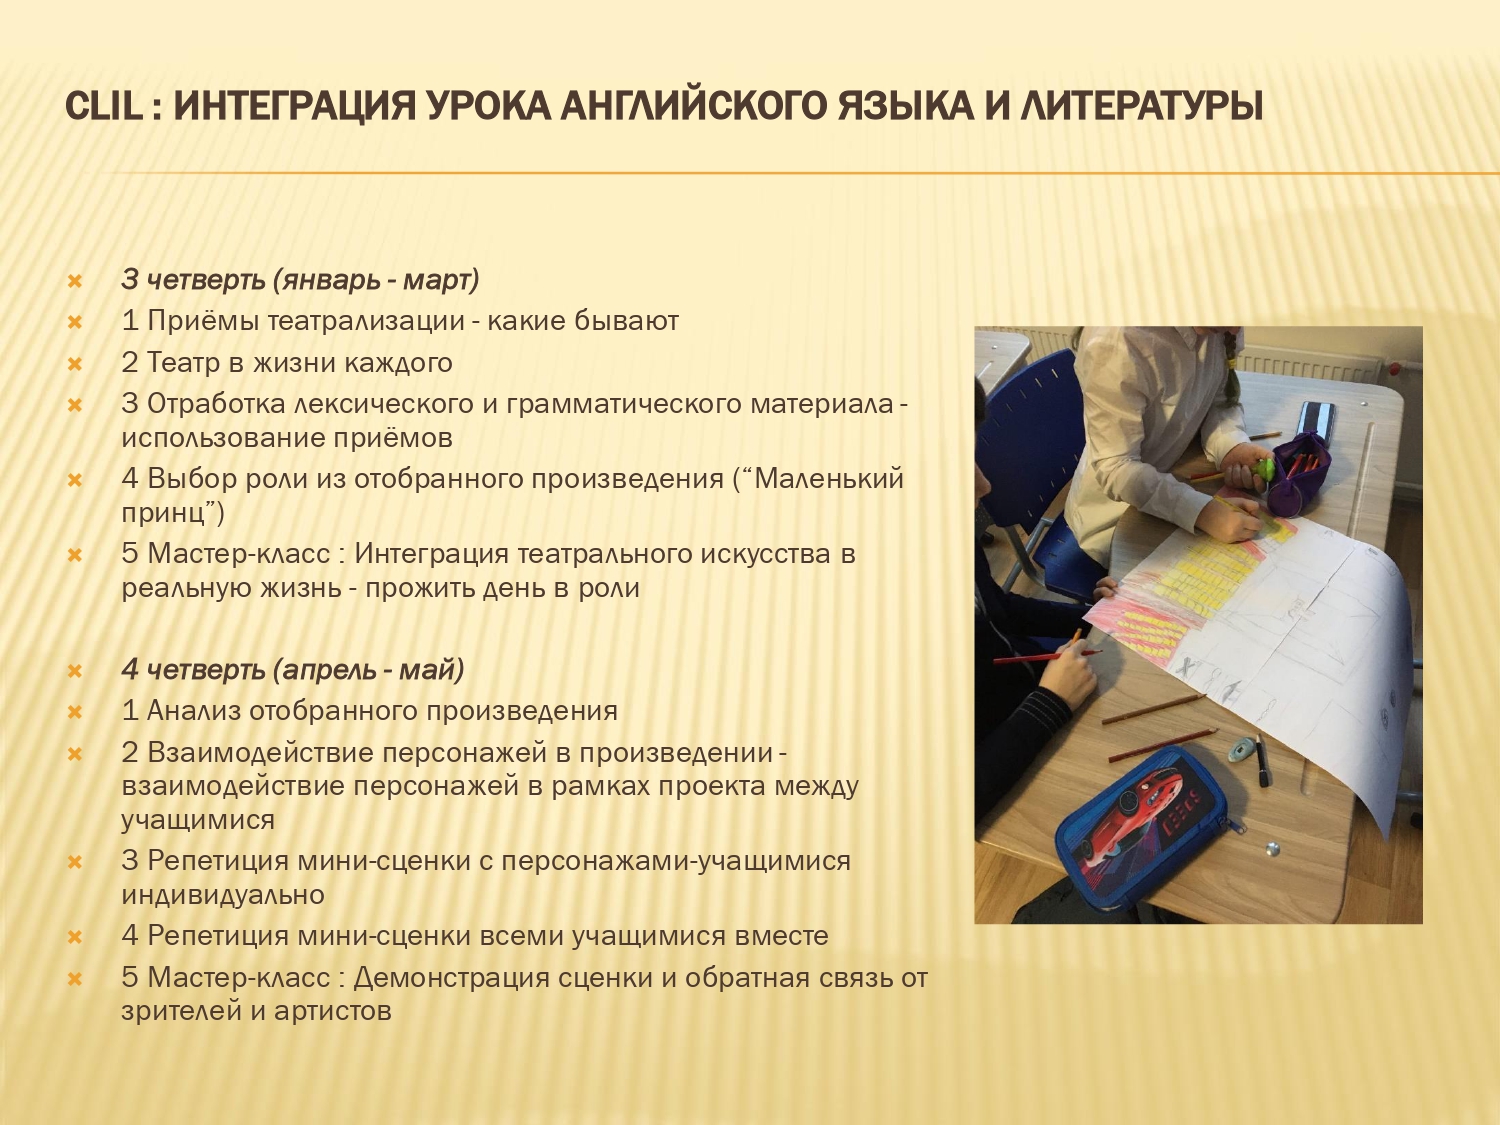 CLIL-презентация_pages-to-jpg-0024